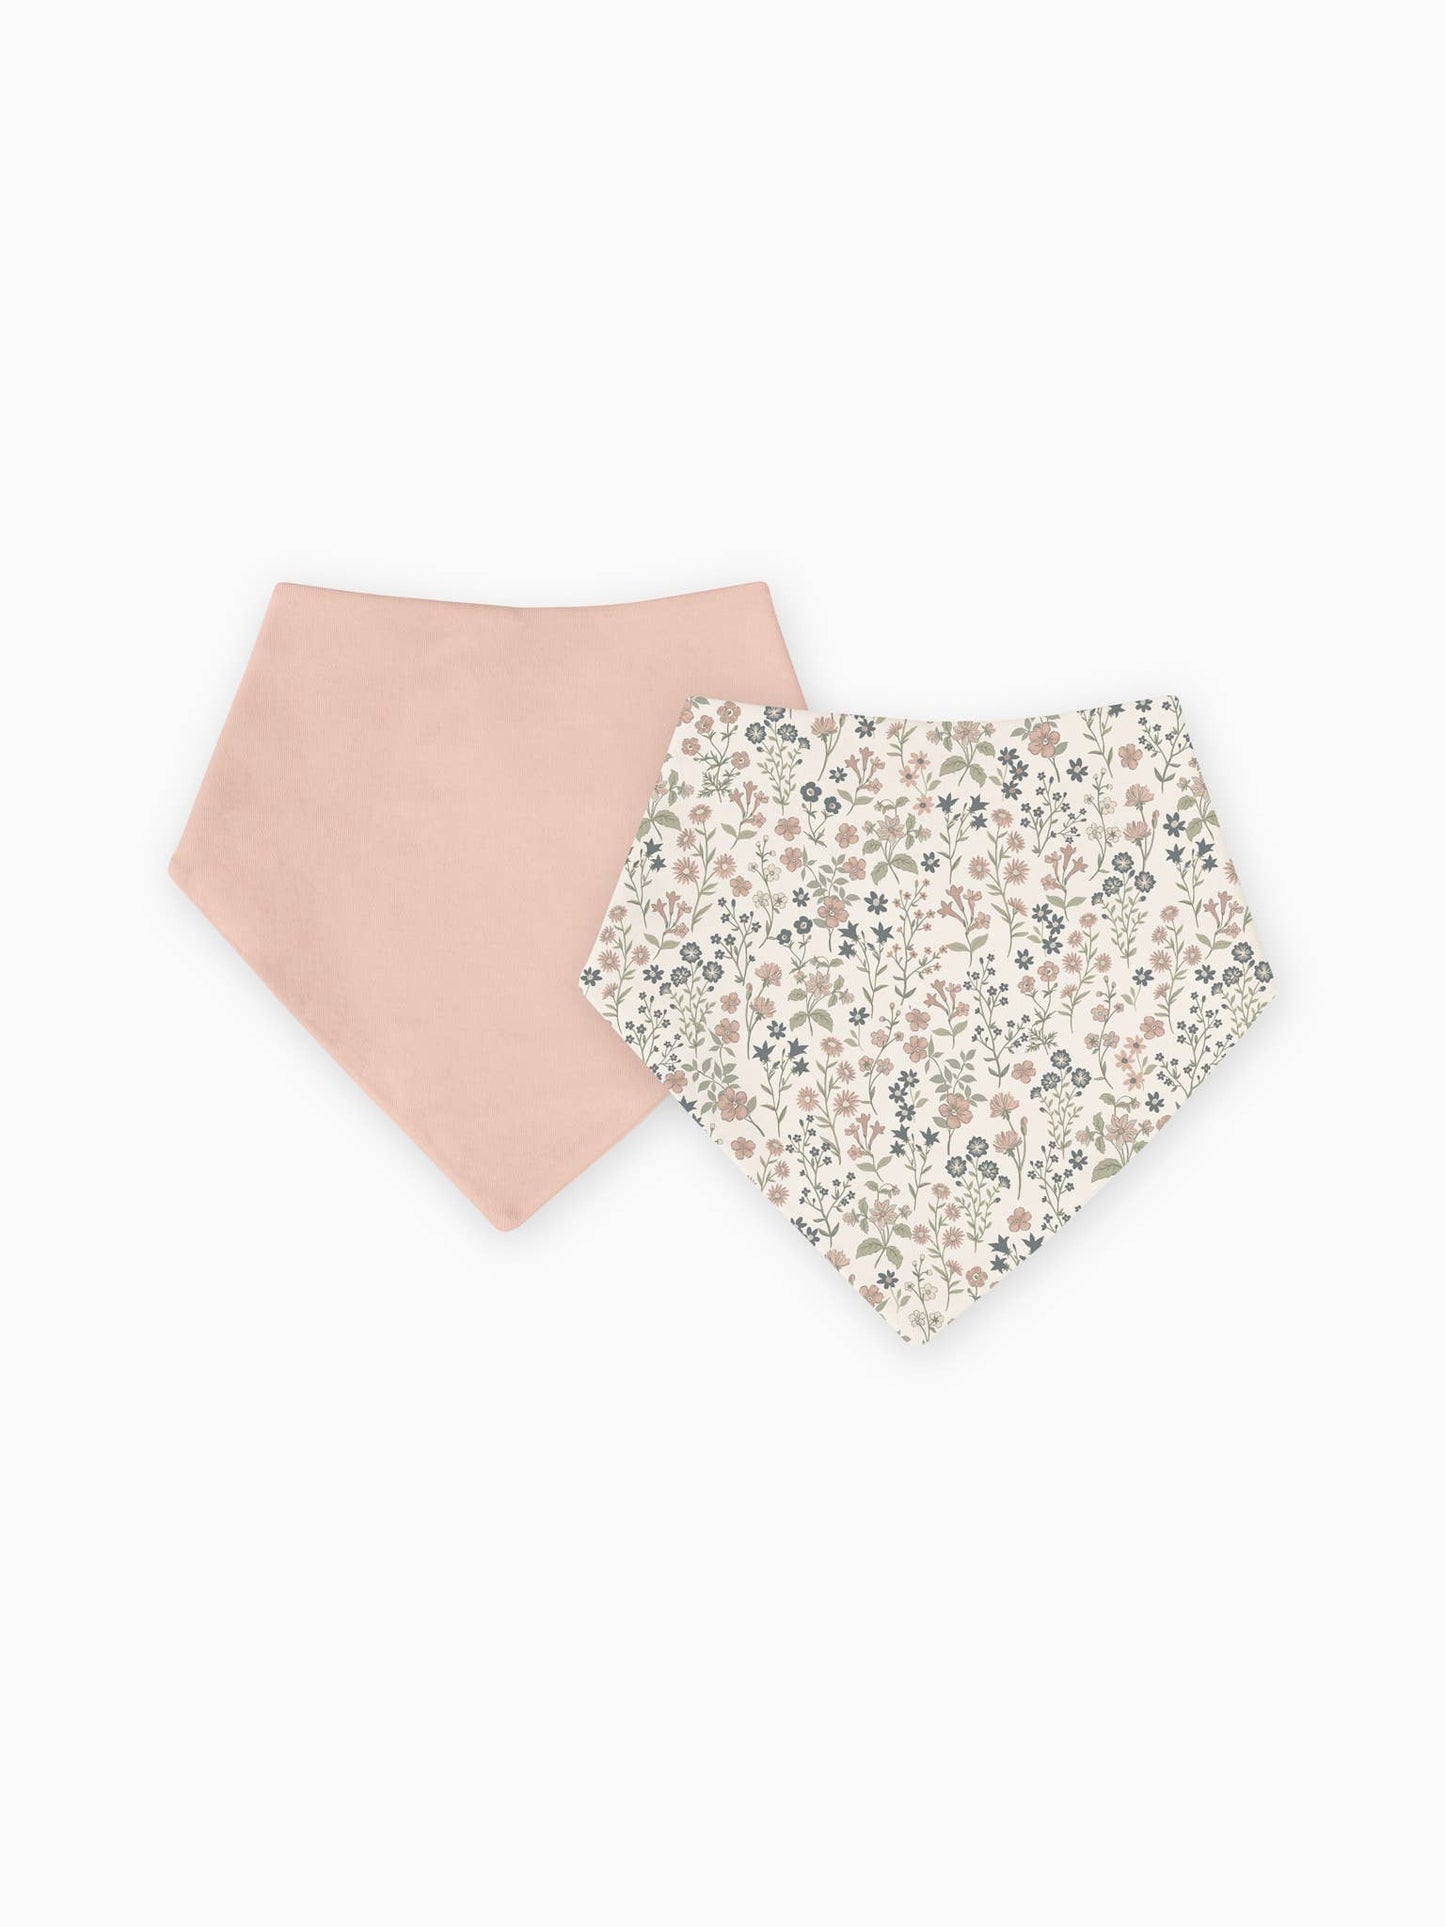 2 Pack Bibs - Meadow Floral and Blush